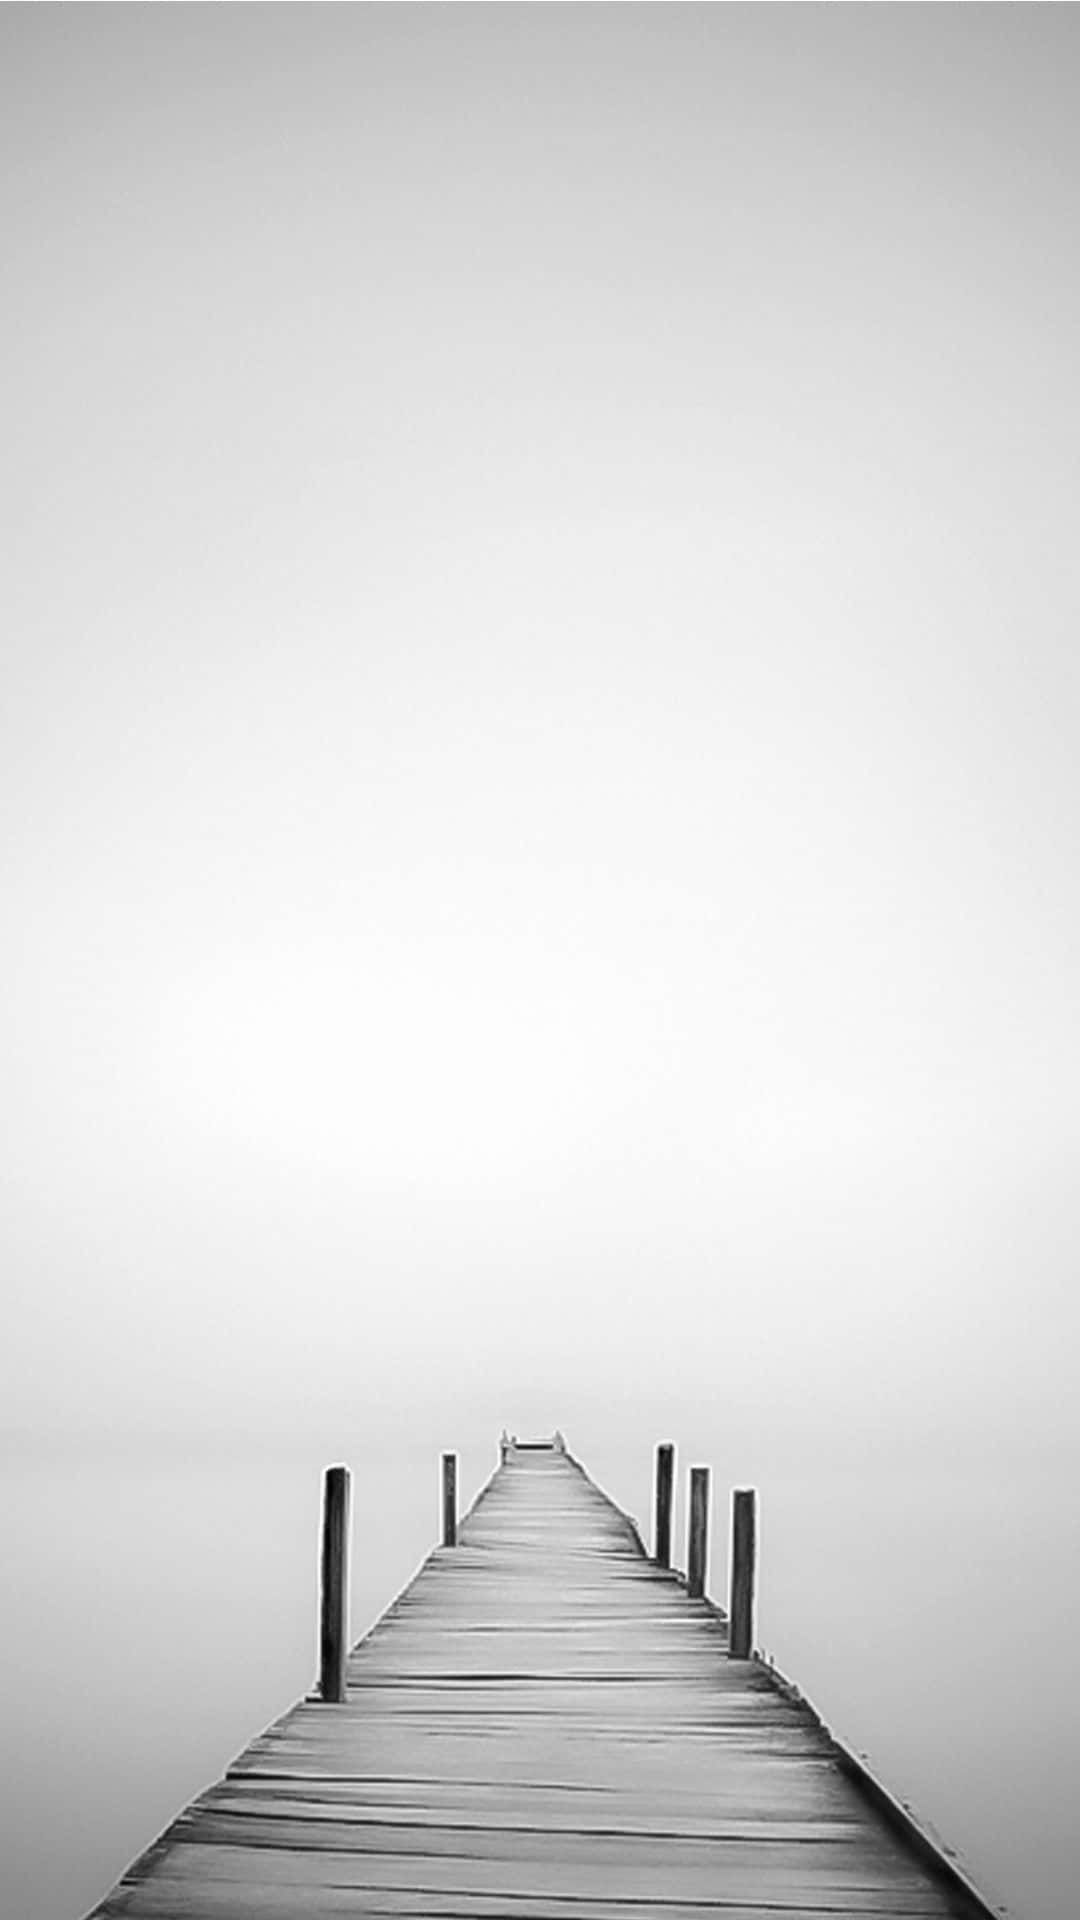 A Black And White Photo Of A Pier In The Fog